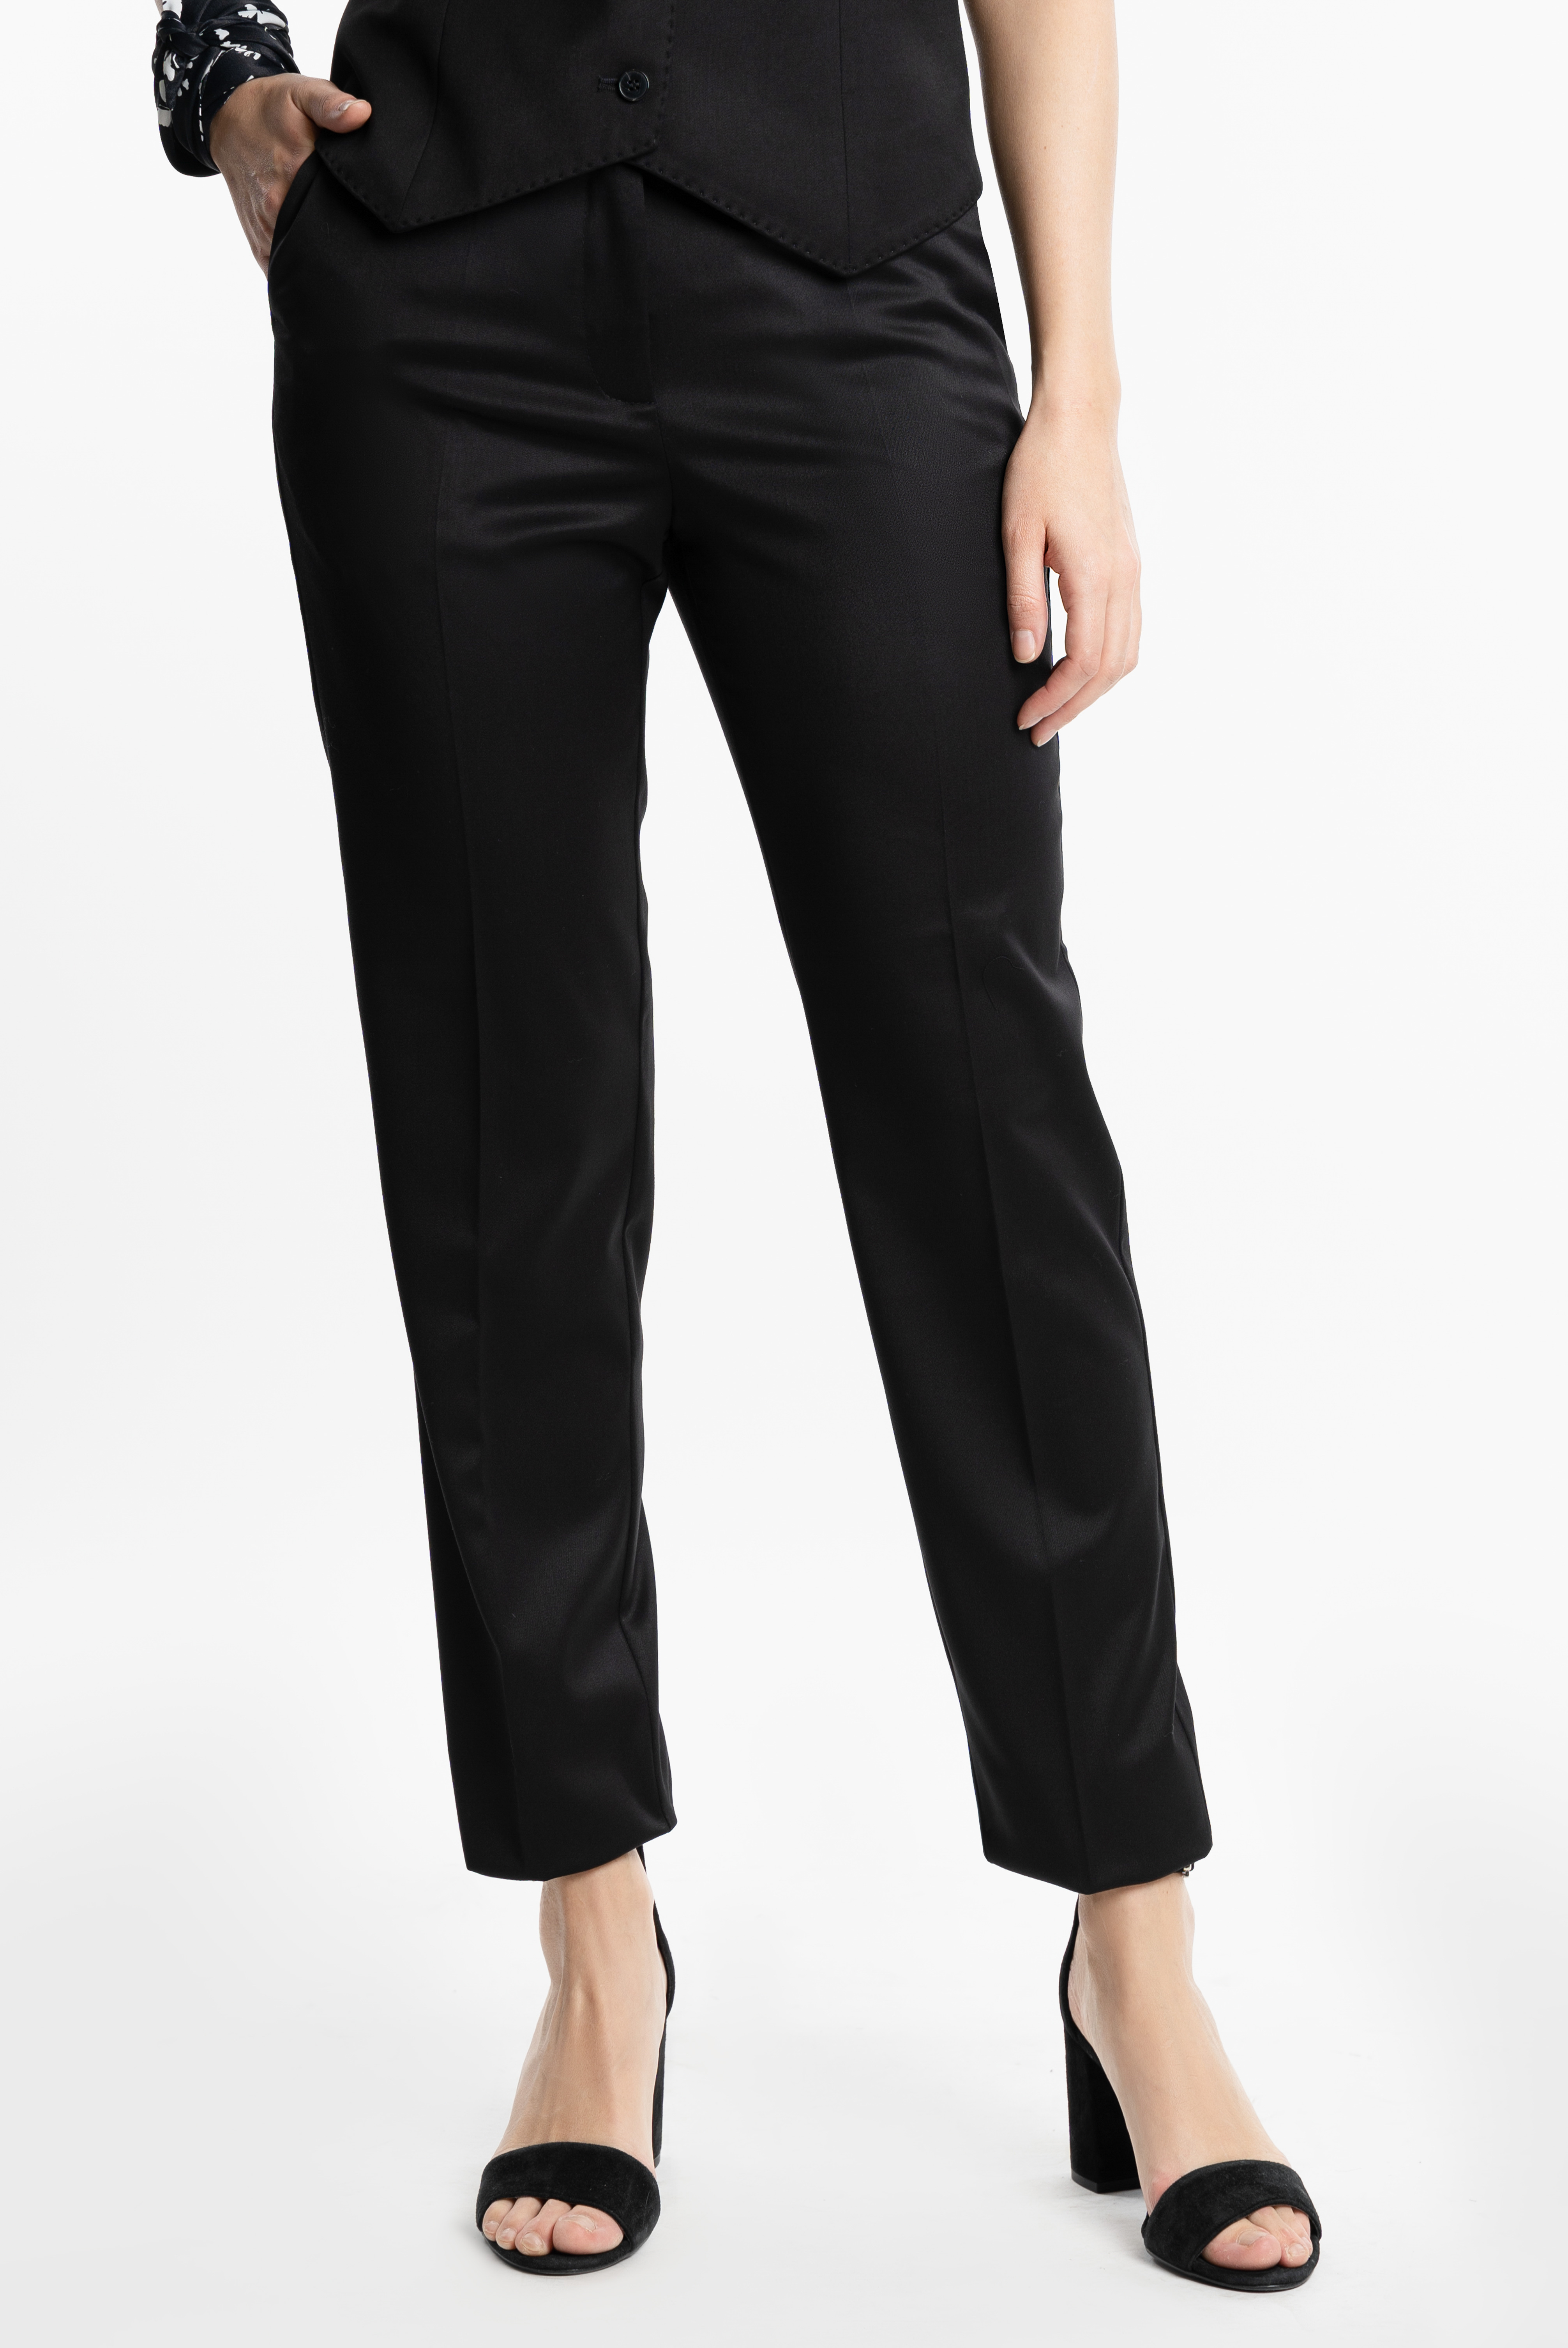 To women :: Women's clothing :: Trousers :: Classic pants :: Arber ...